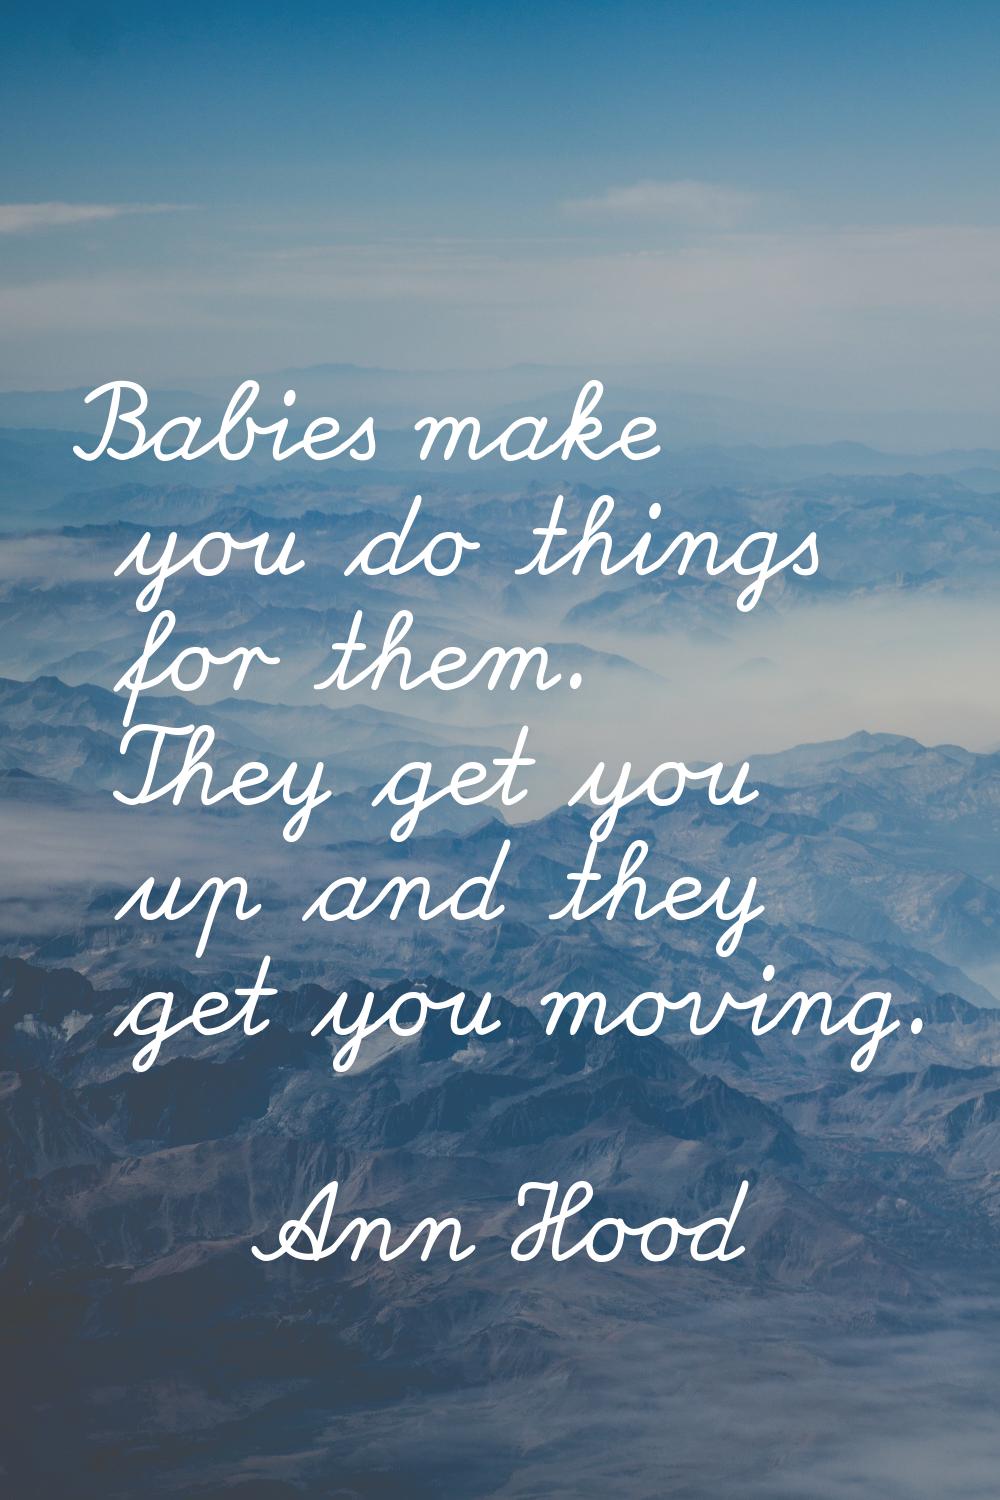 Babies make you do things for them. They get you up and they get you moving.